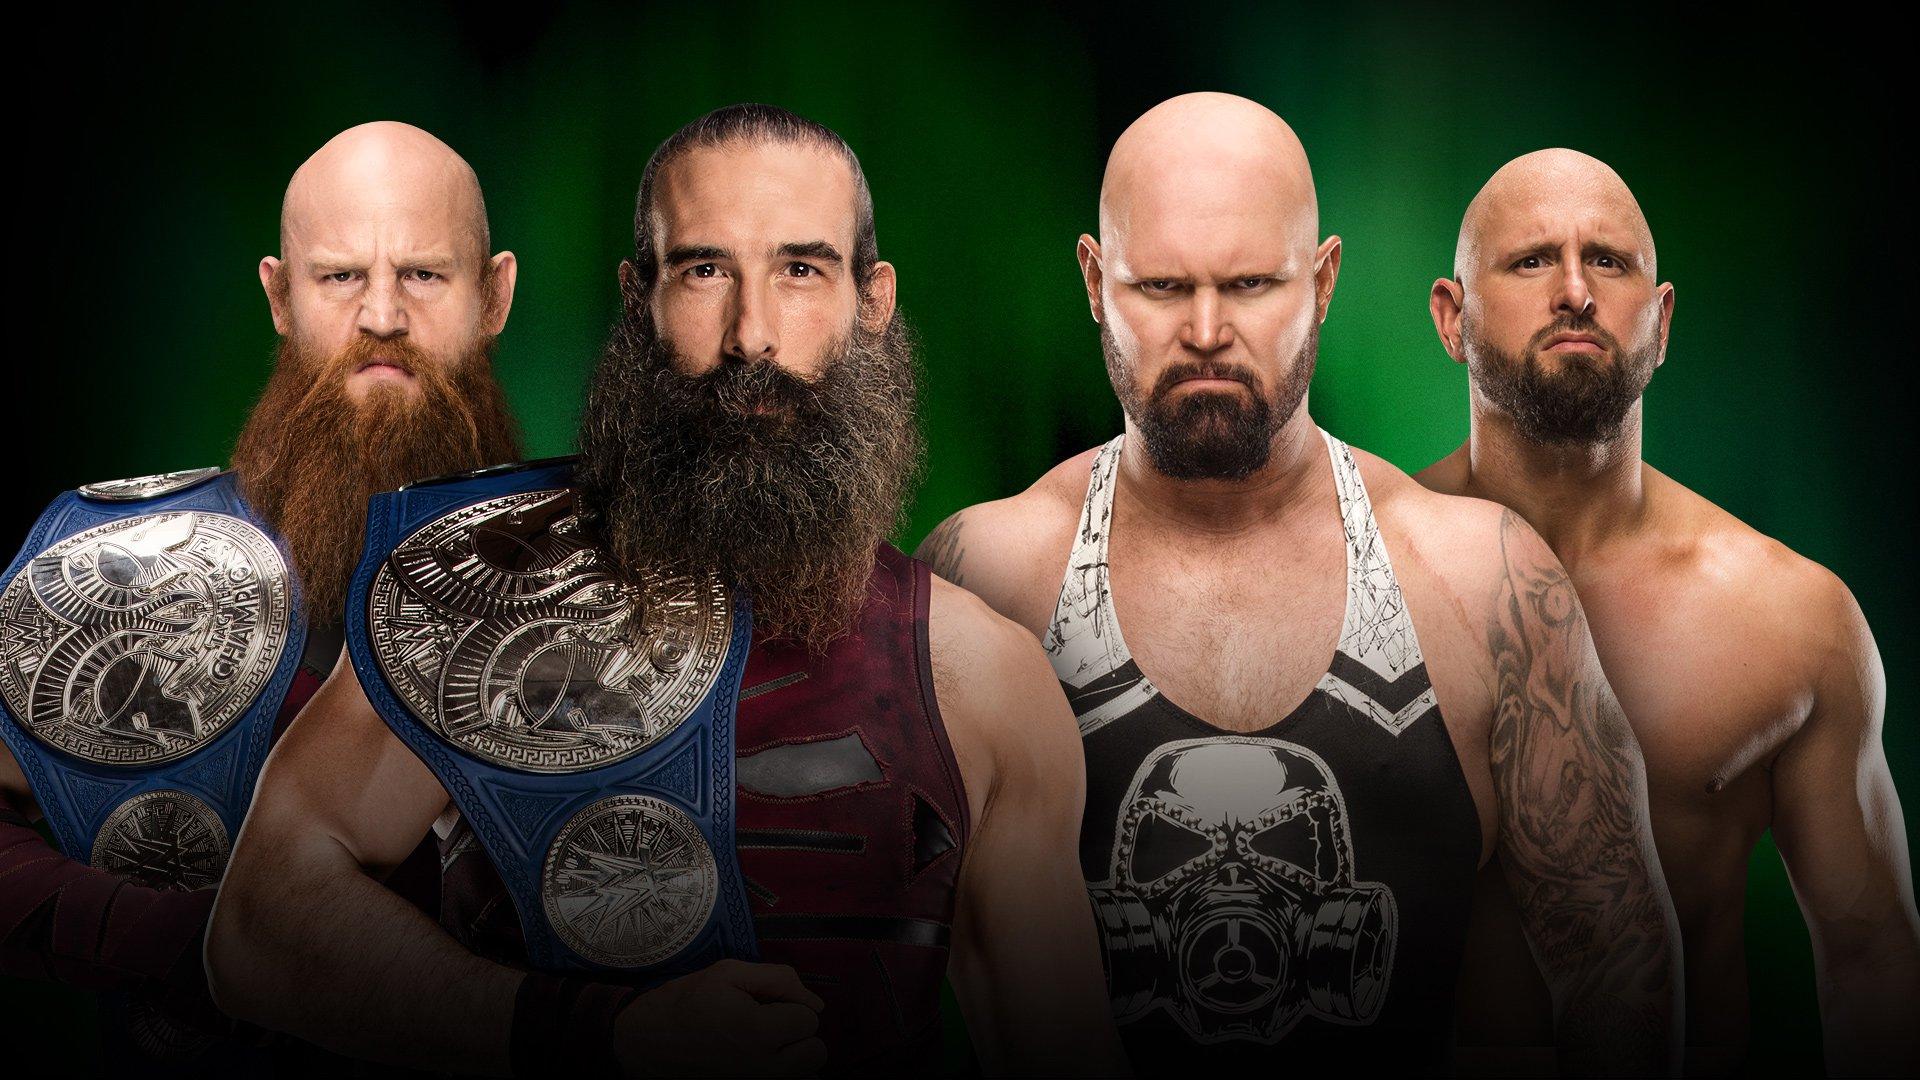 2018 bank 2018. Bludgeon brothers WWE. WWE SMACKDOWN tag Team tag Team Championship. WWE money in the Bank 2018. WWE 2 brothers.